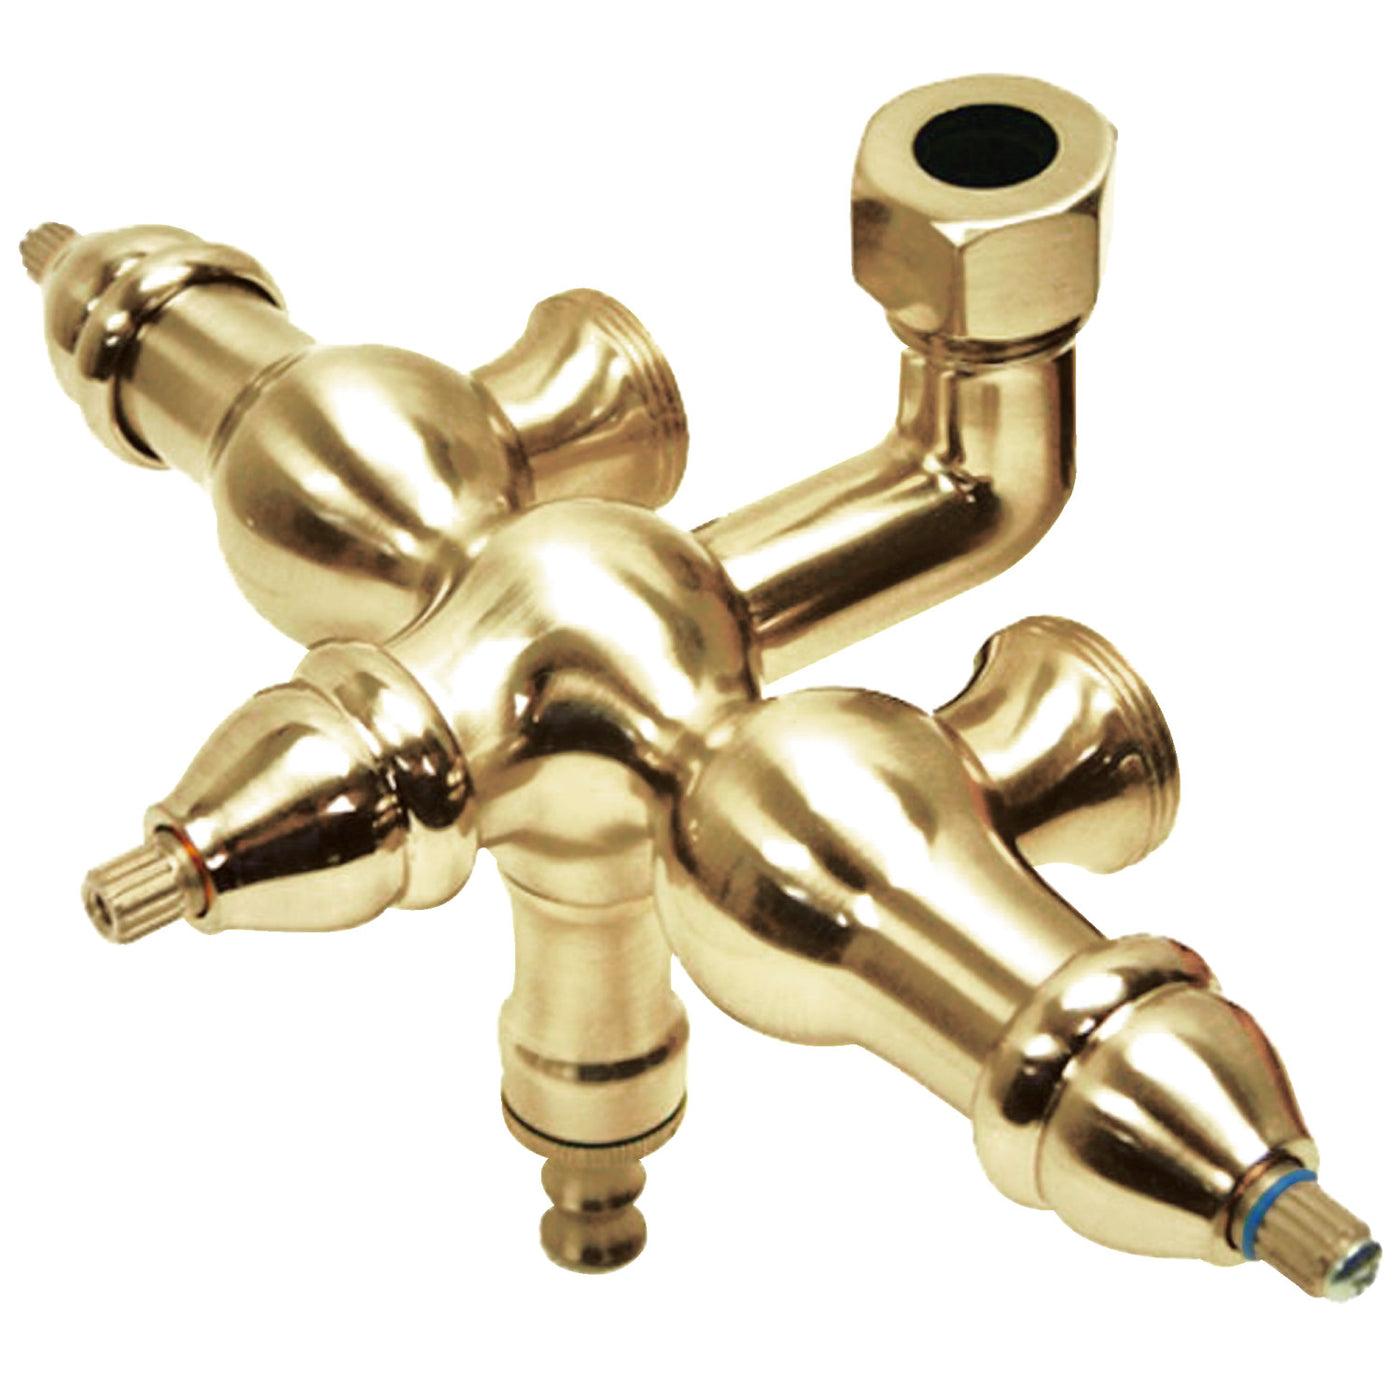 Elements of Design ED400-2 Down Spout Tub Faucet Body, Polished Brass